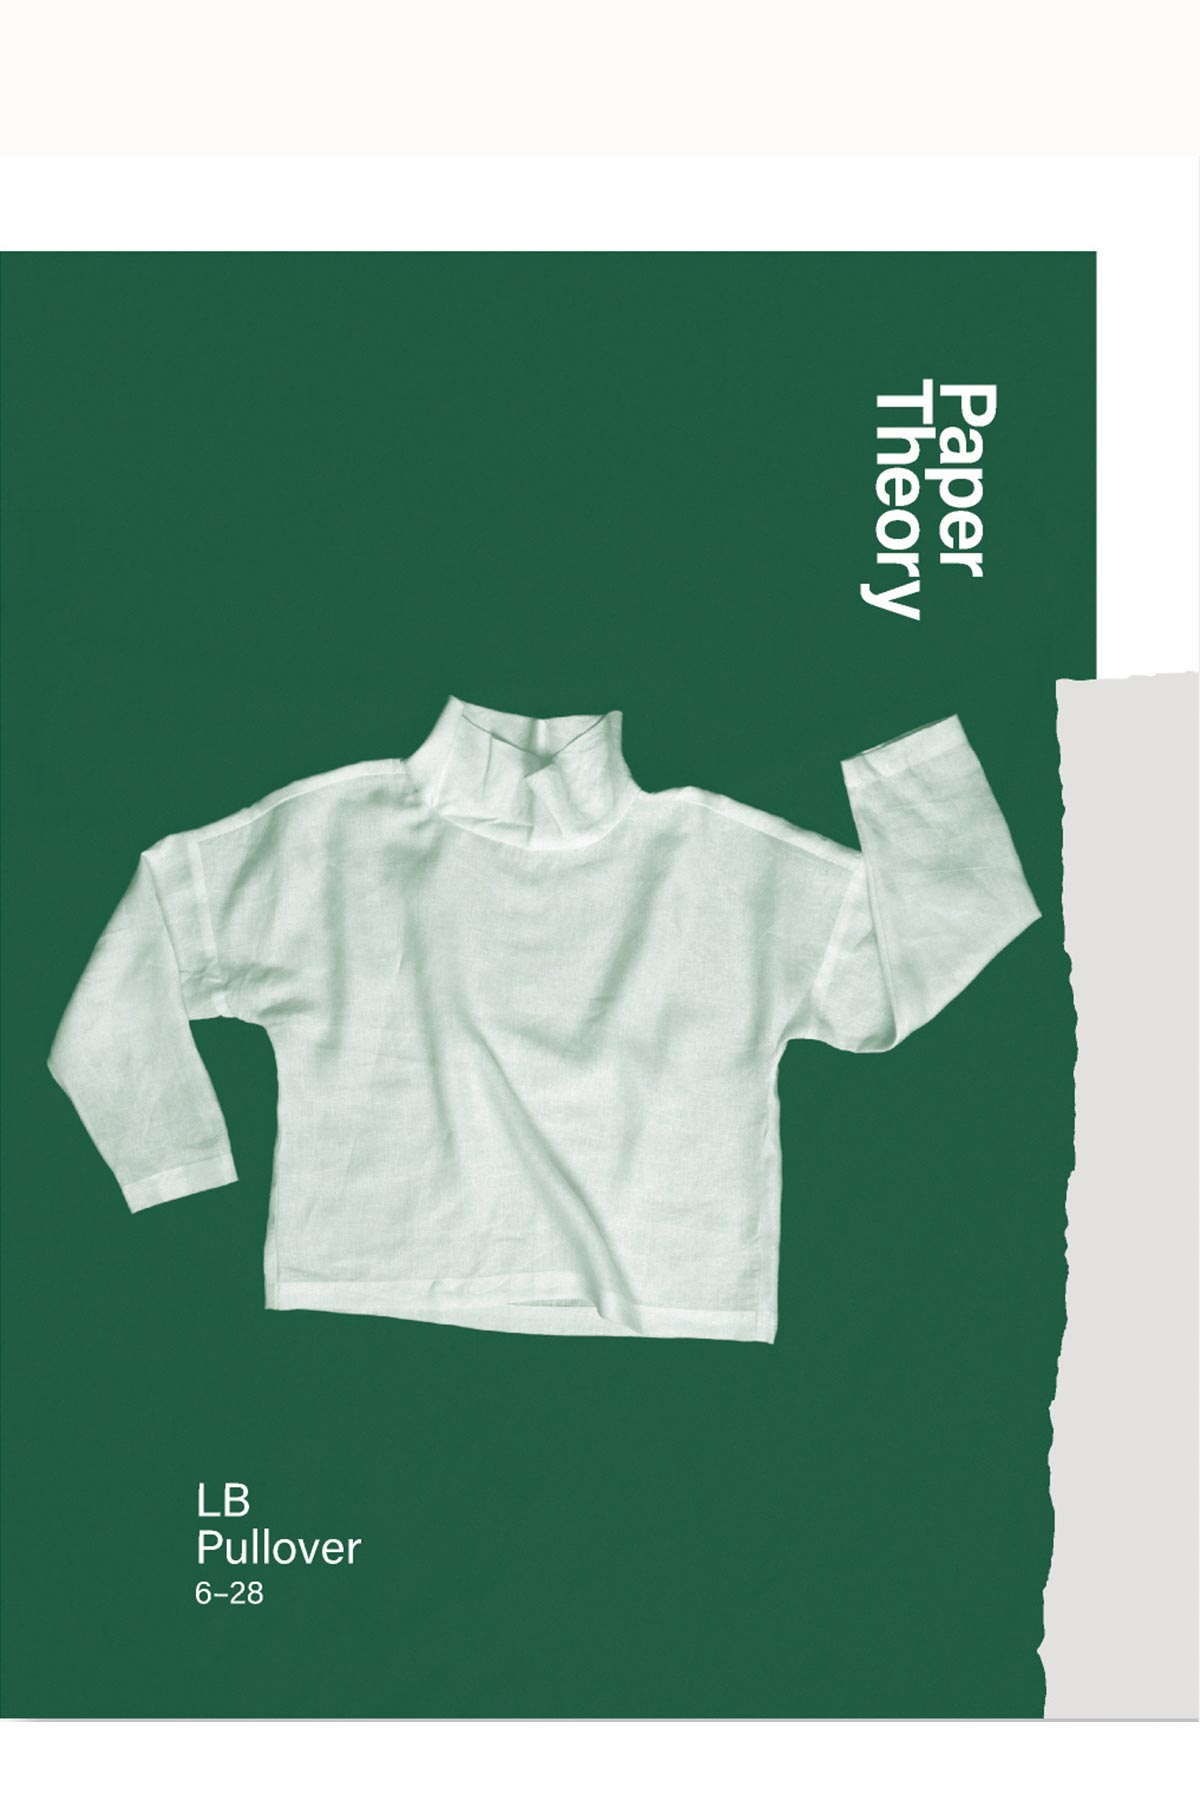 Paper Theory LB Pullover Sewing Pattern 6-28